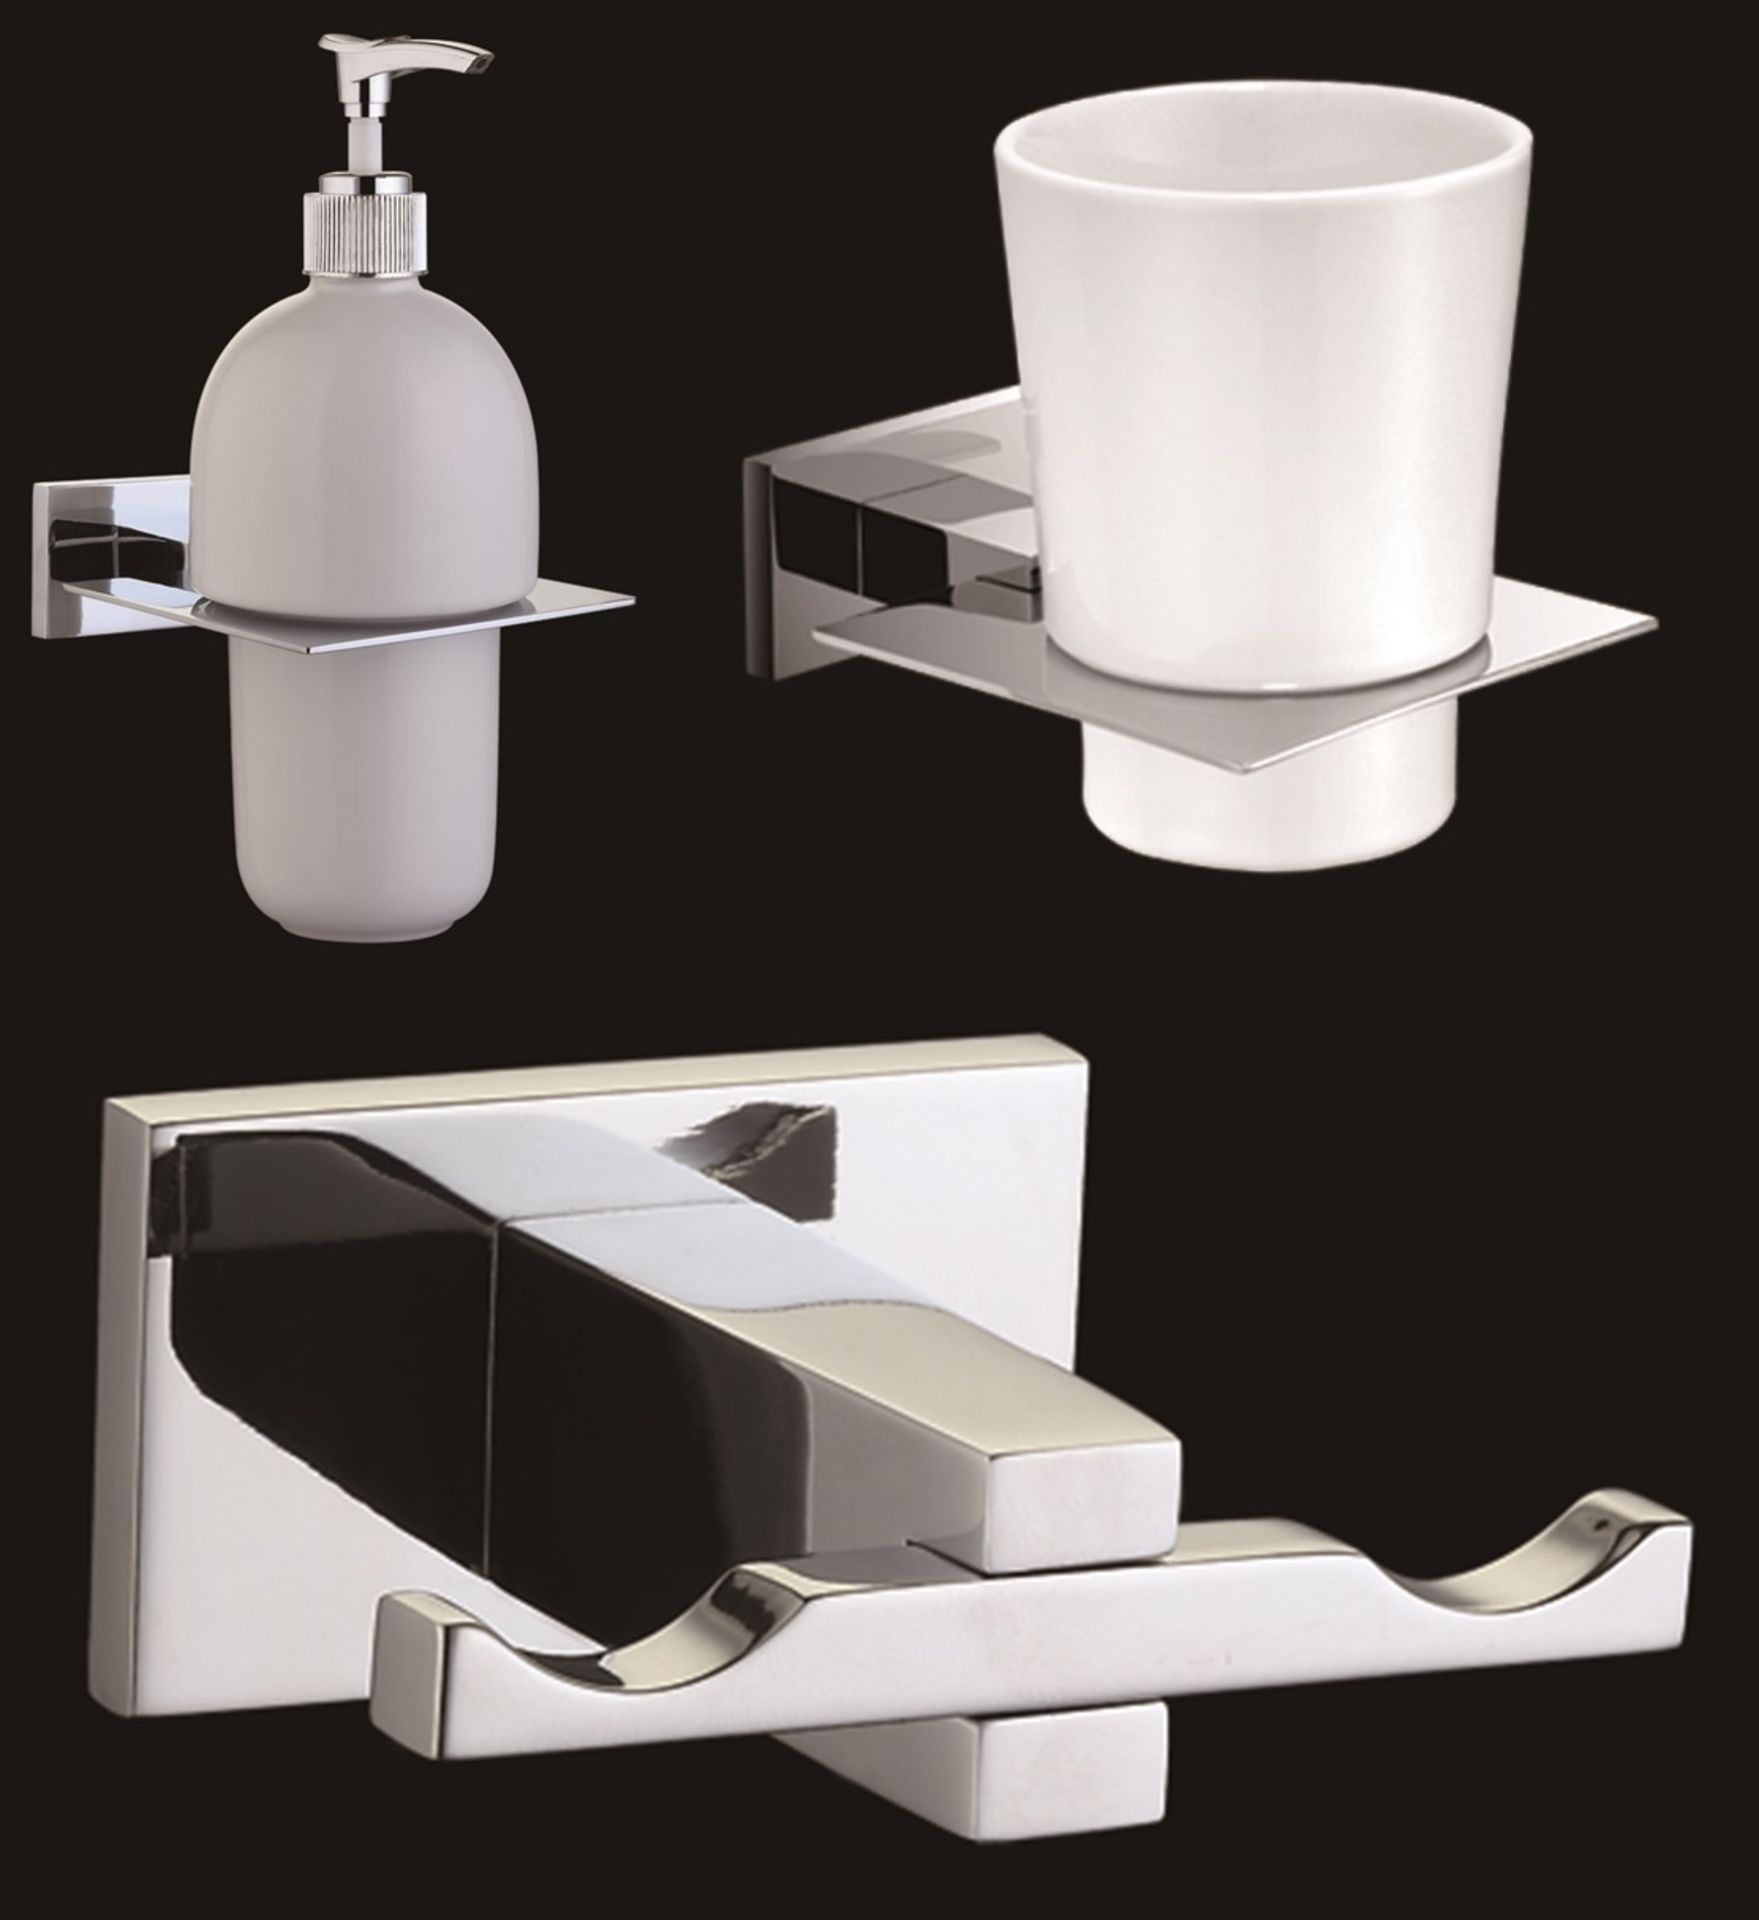 1 x Vogue Series 6 Bathroom Accessory Set in Chrome - New Boxed Stock - Includes 3 Piece Set